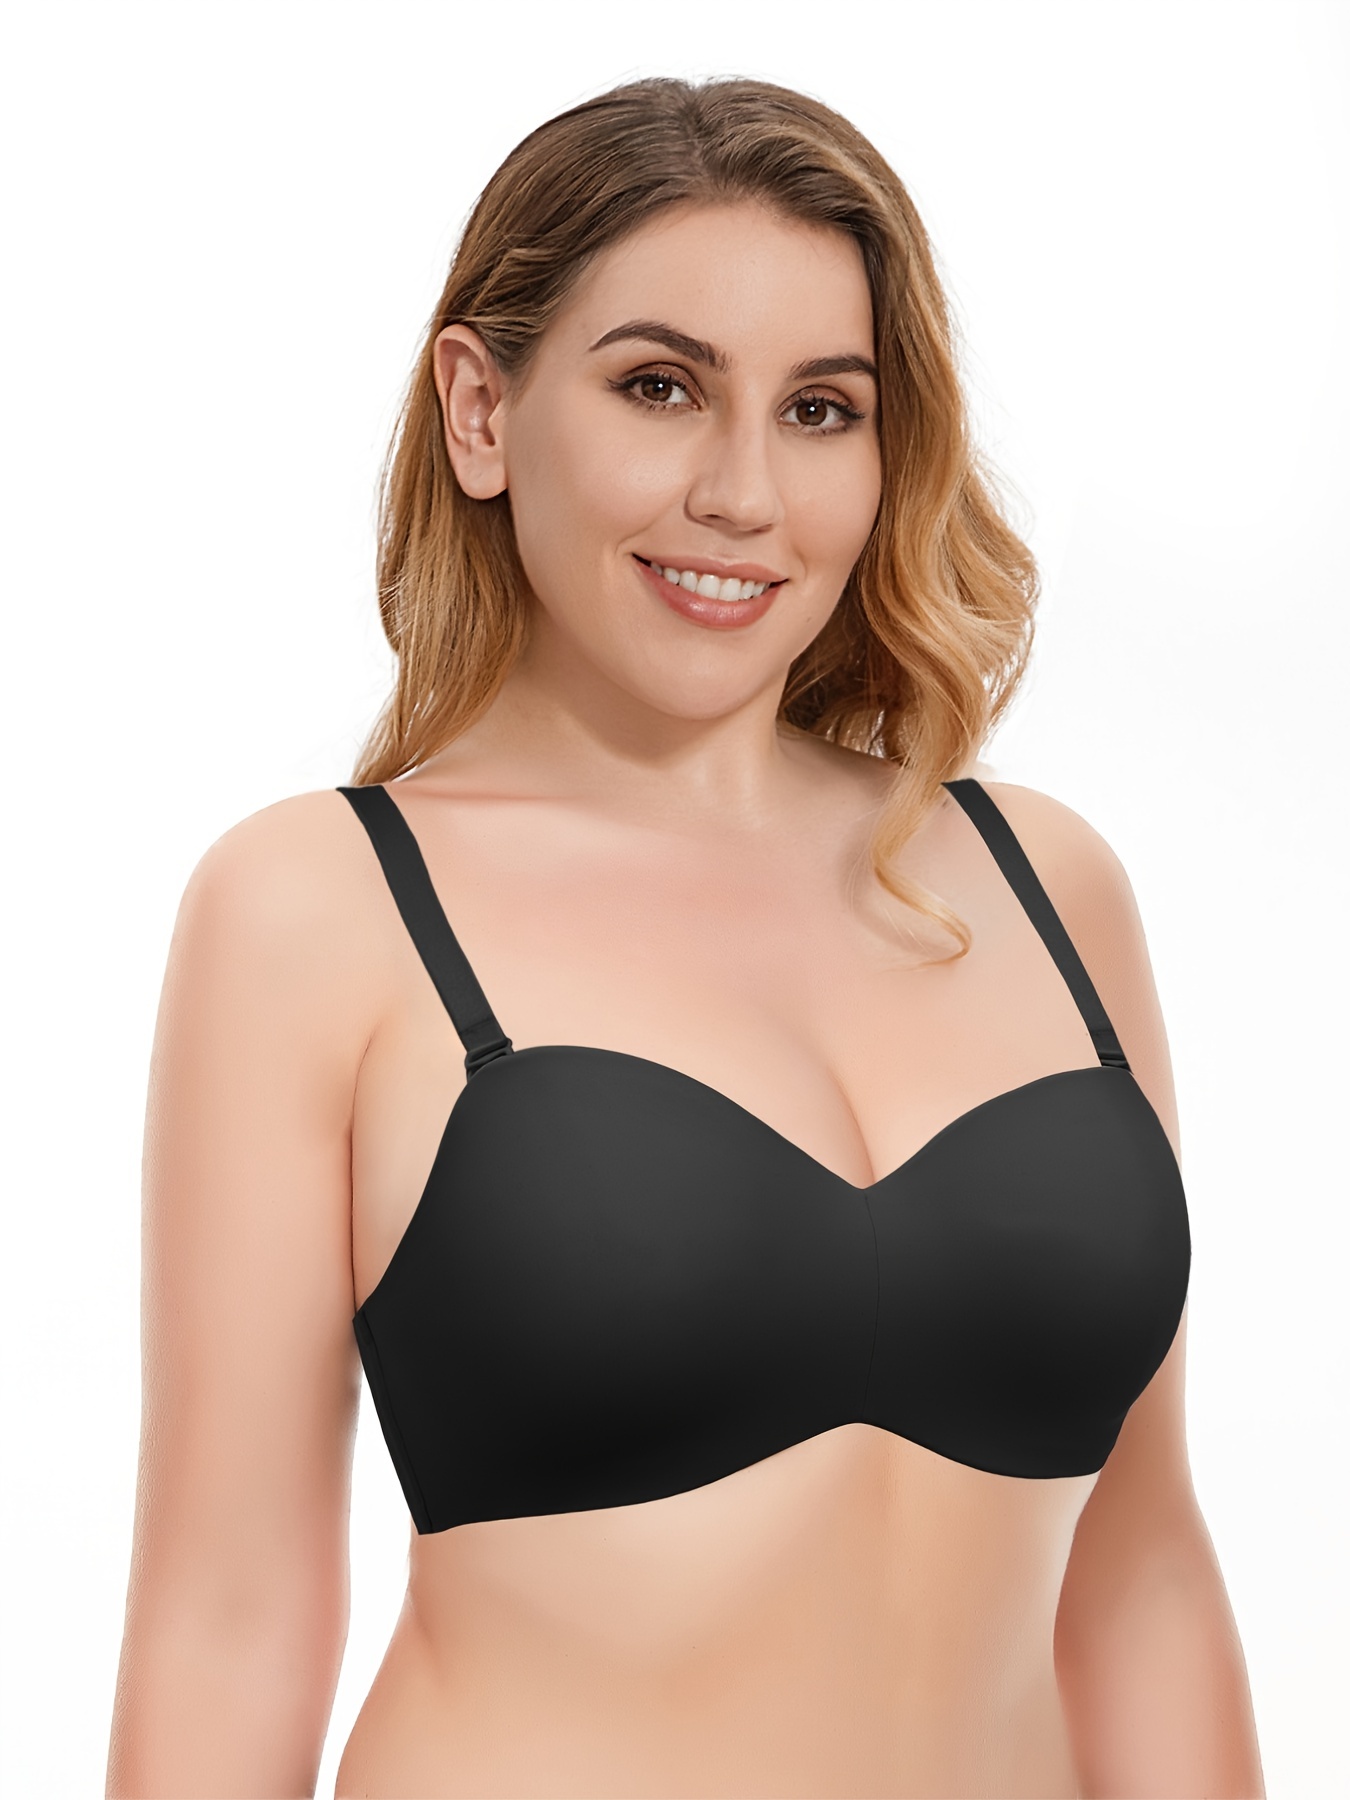 Qcmgmg Bras for Small Breasted Women Padded Push Up Strapless Bra Plus Size  Bandeau Tube V Neck Wireless Bras for Women Black 38G